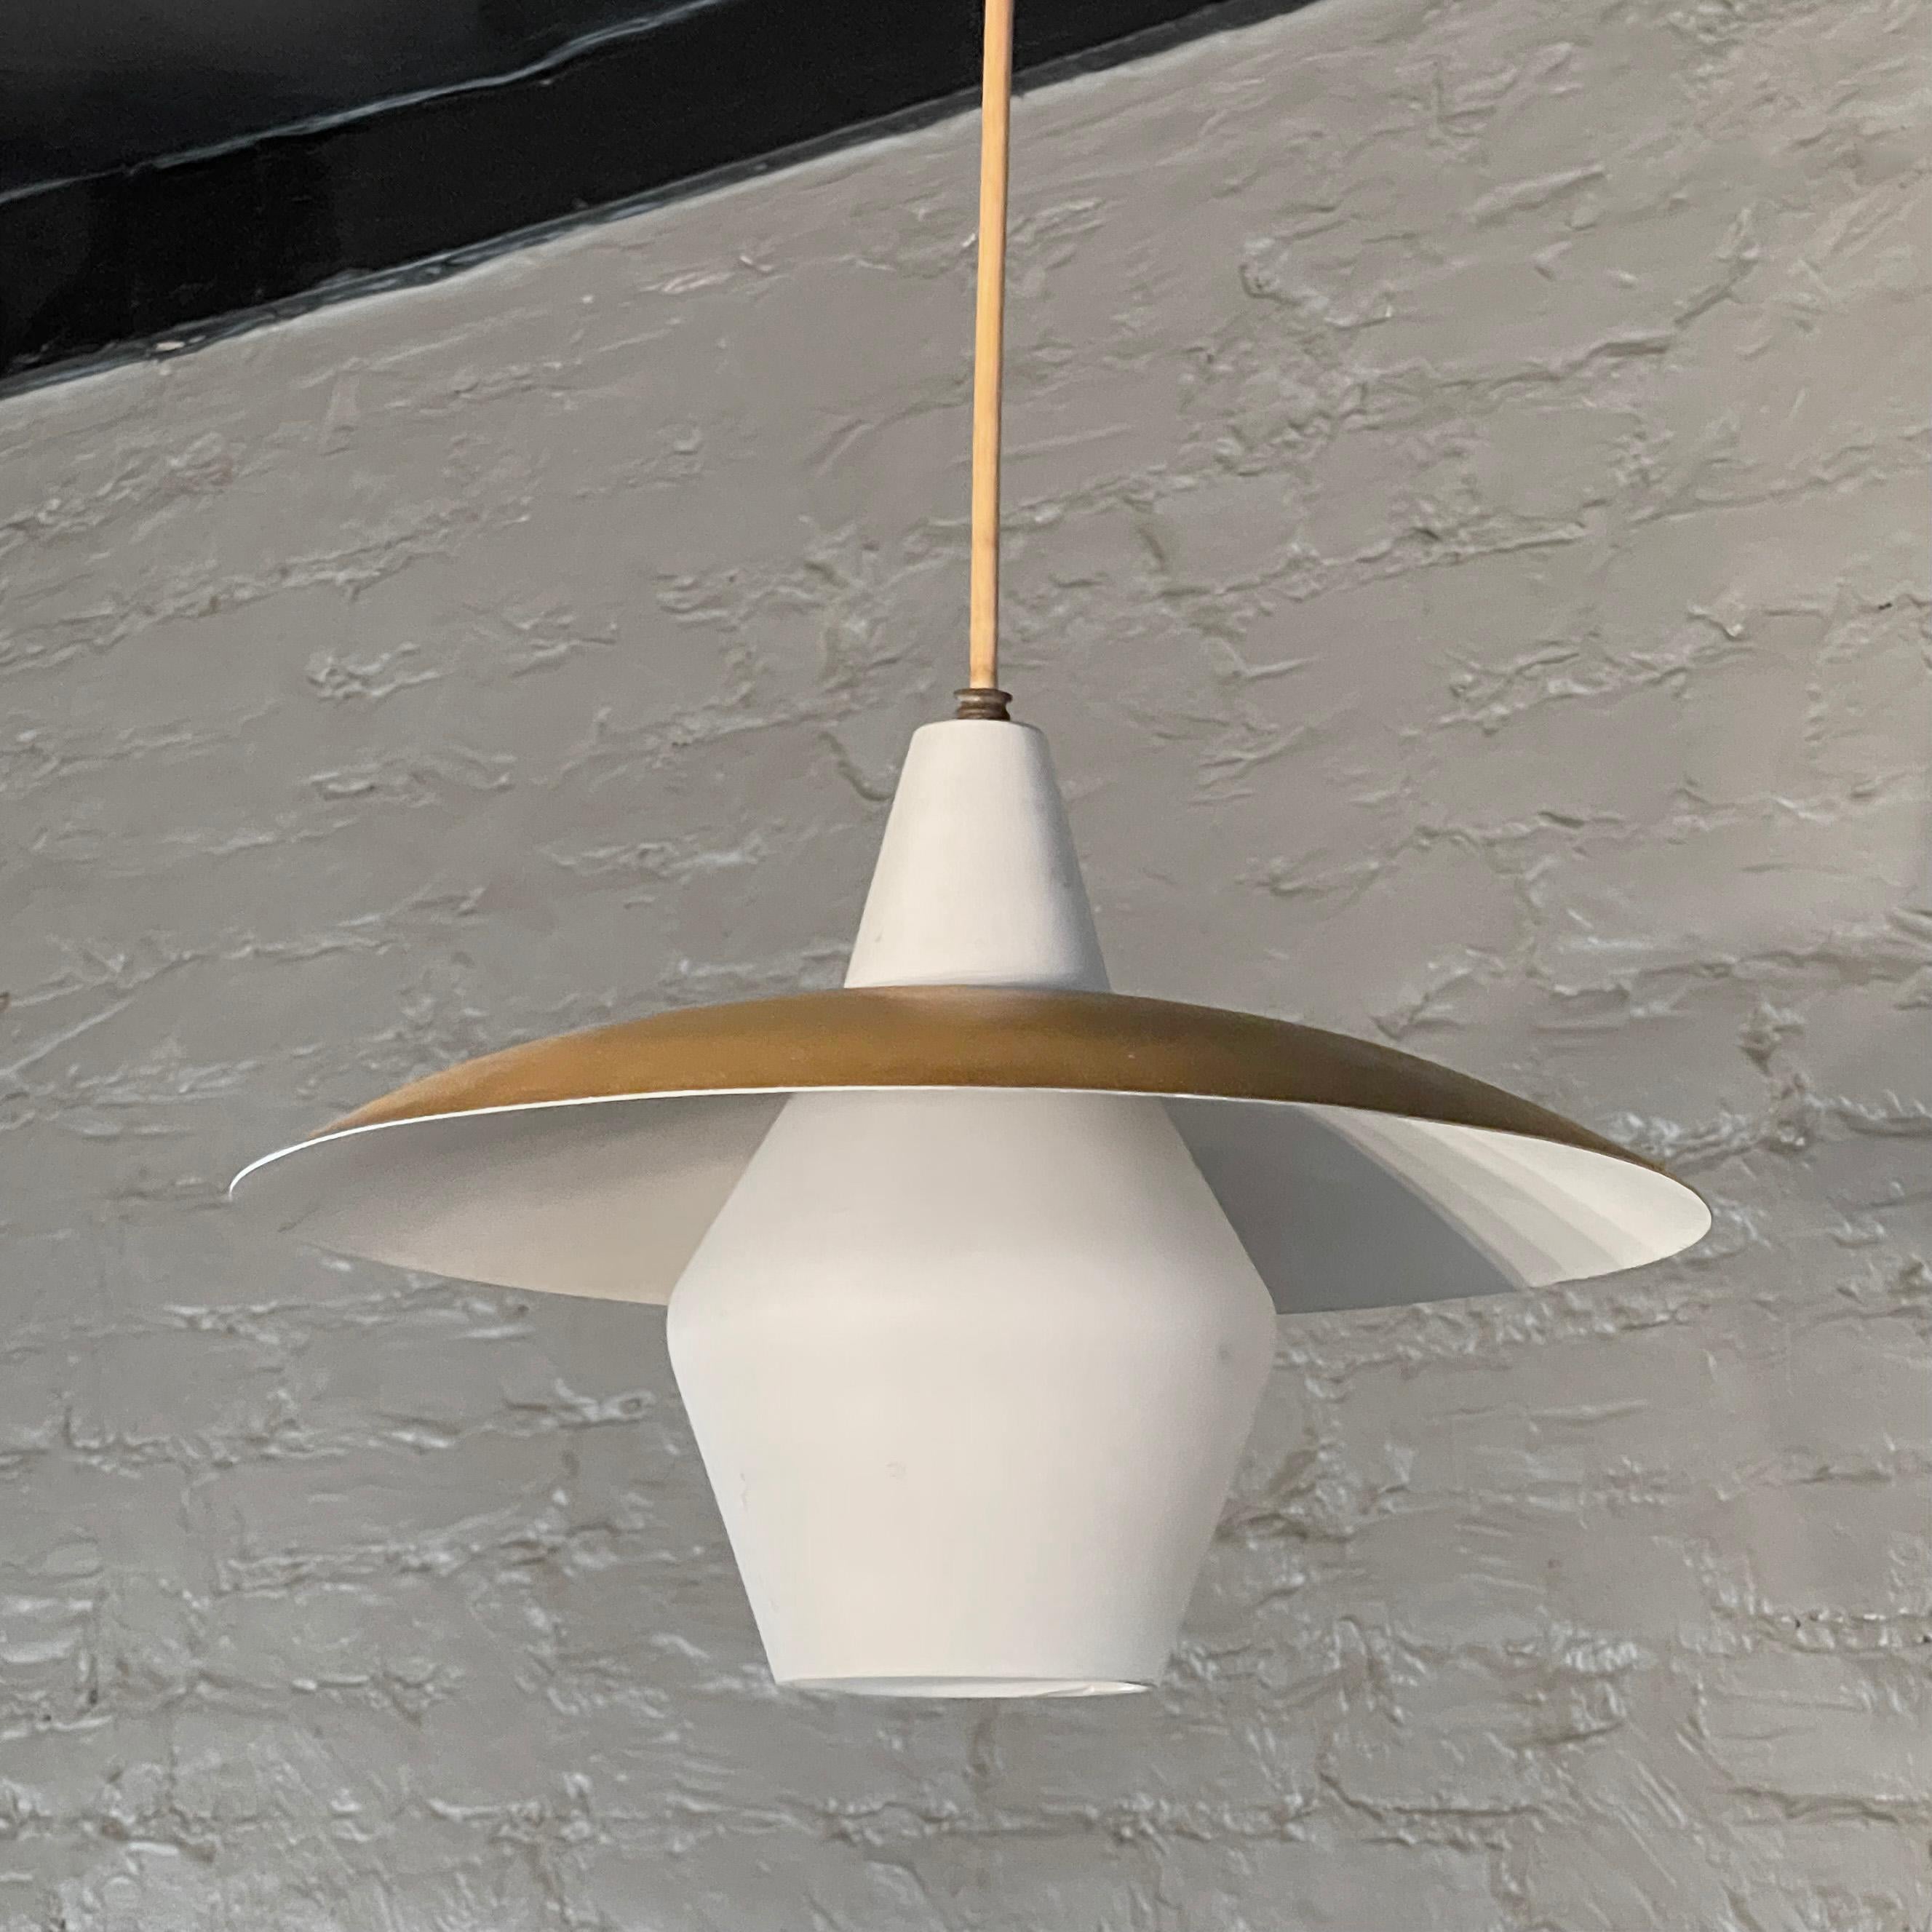 Mid century modern pendant light features a frosted glass lantern shade with an intersecting metal disc with gold exterior and white interior in the style of Gerald Thurston, Lightolier. The pendant hangs at an overall height of 36 inches.